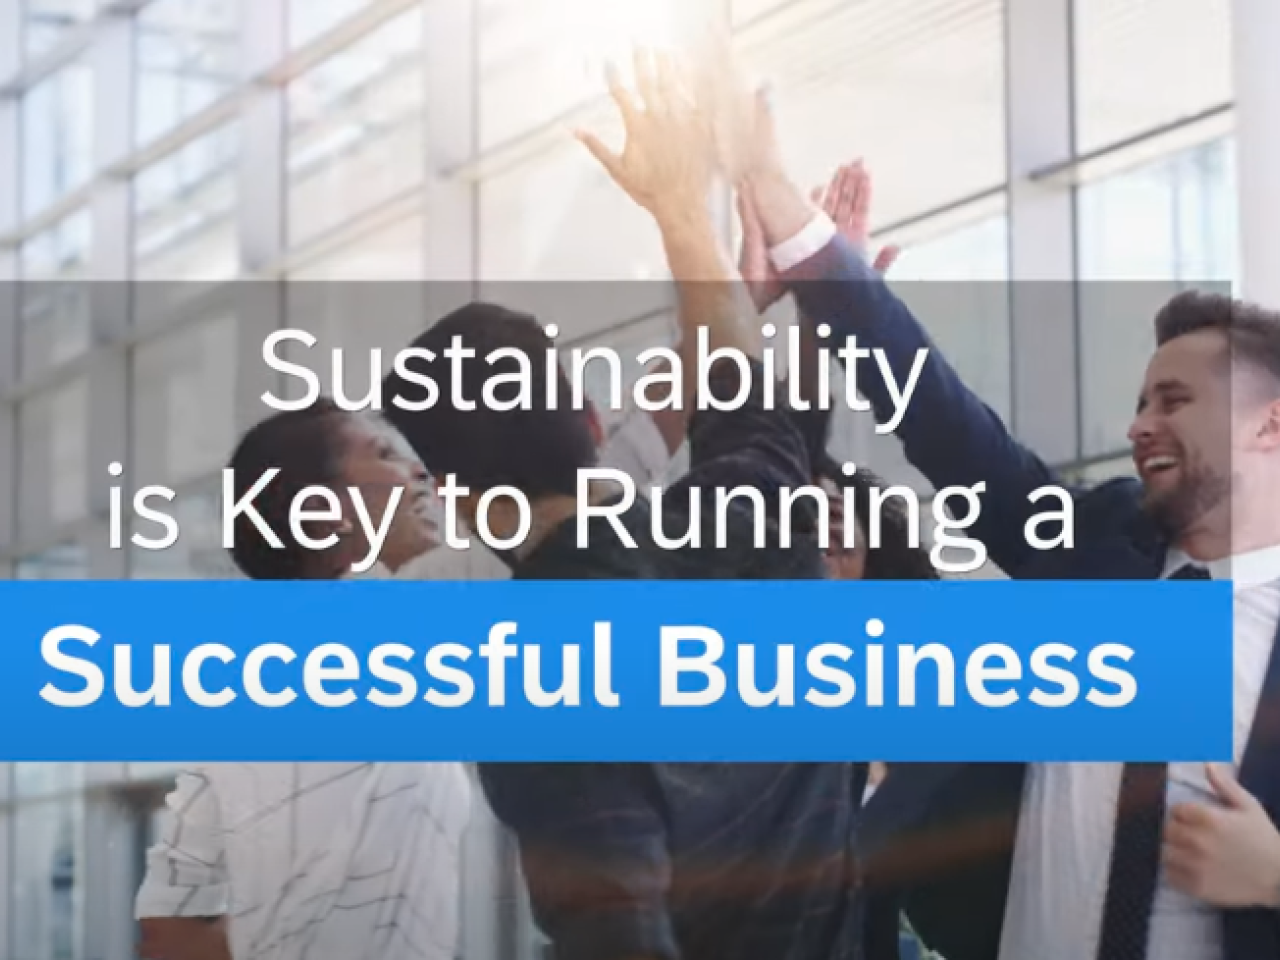 Sustainability is key to running a successful business